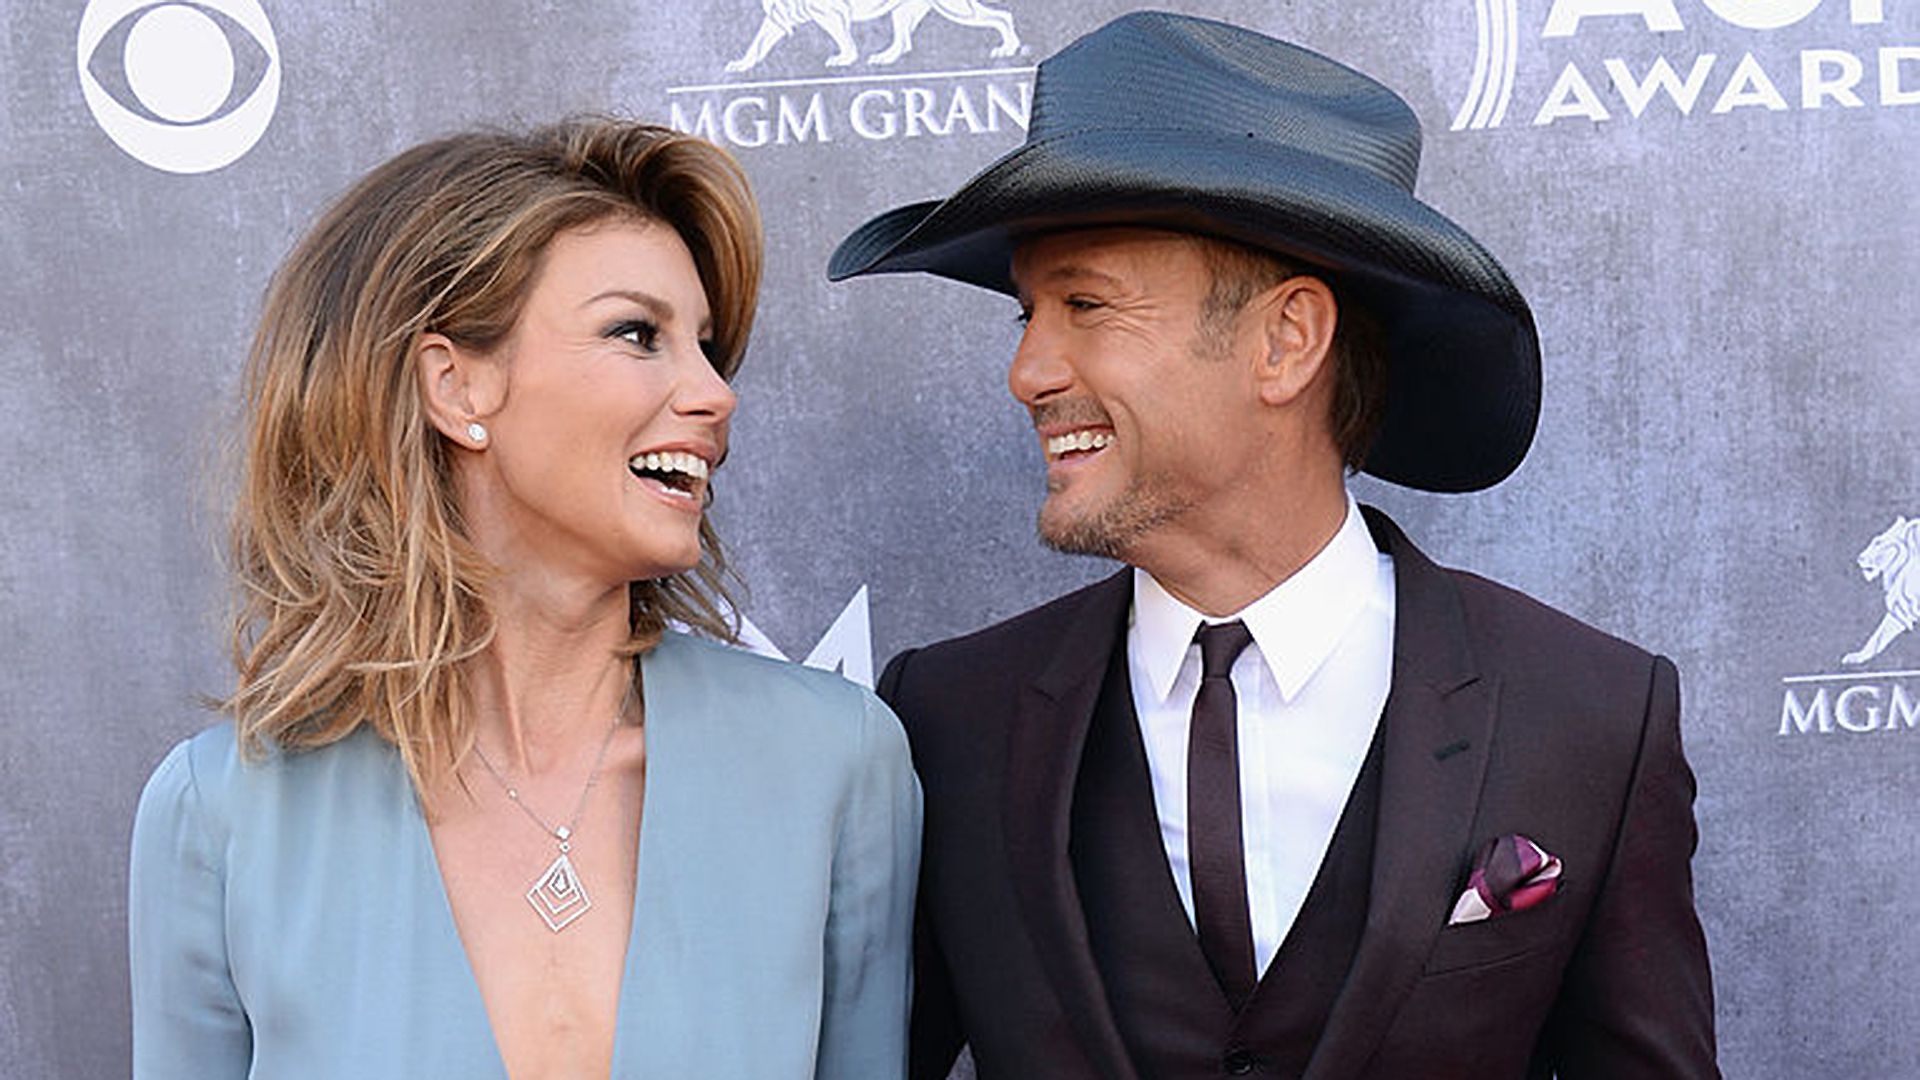 Tim McGraw and Faith Hill smile at one another during 49th Annual Academy Of Country Music Awards red carpet